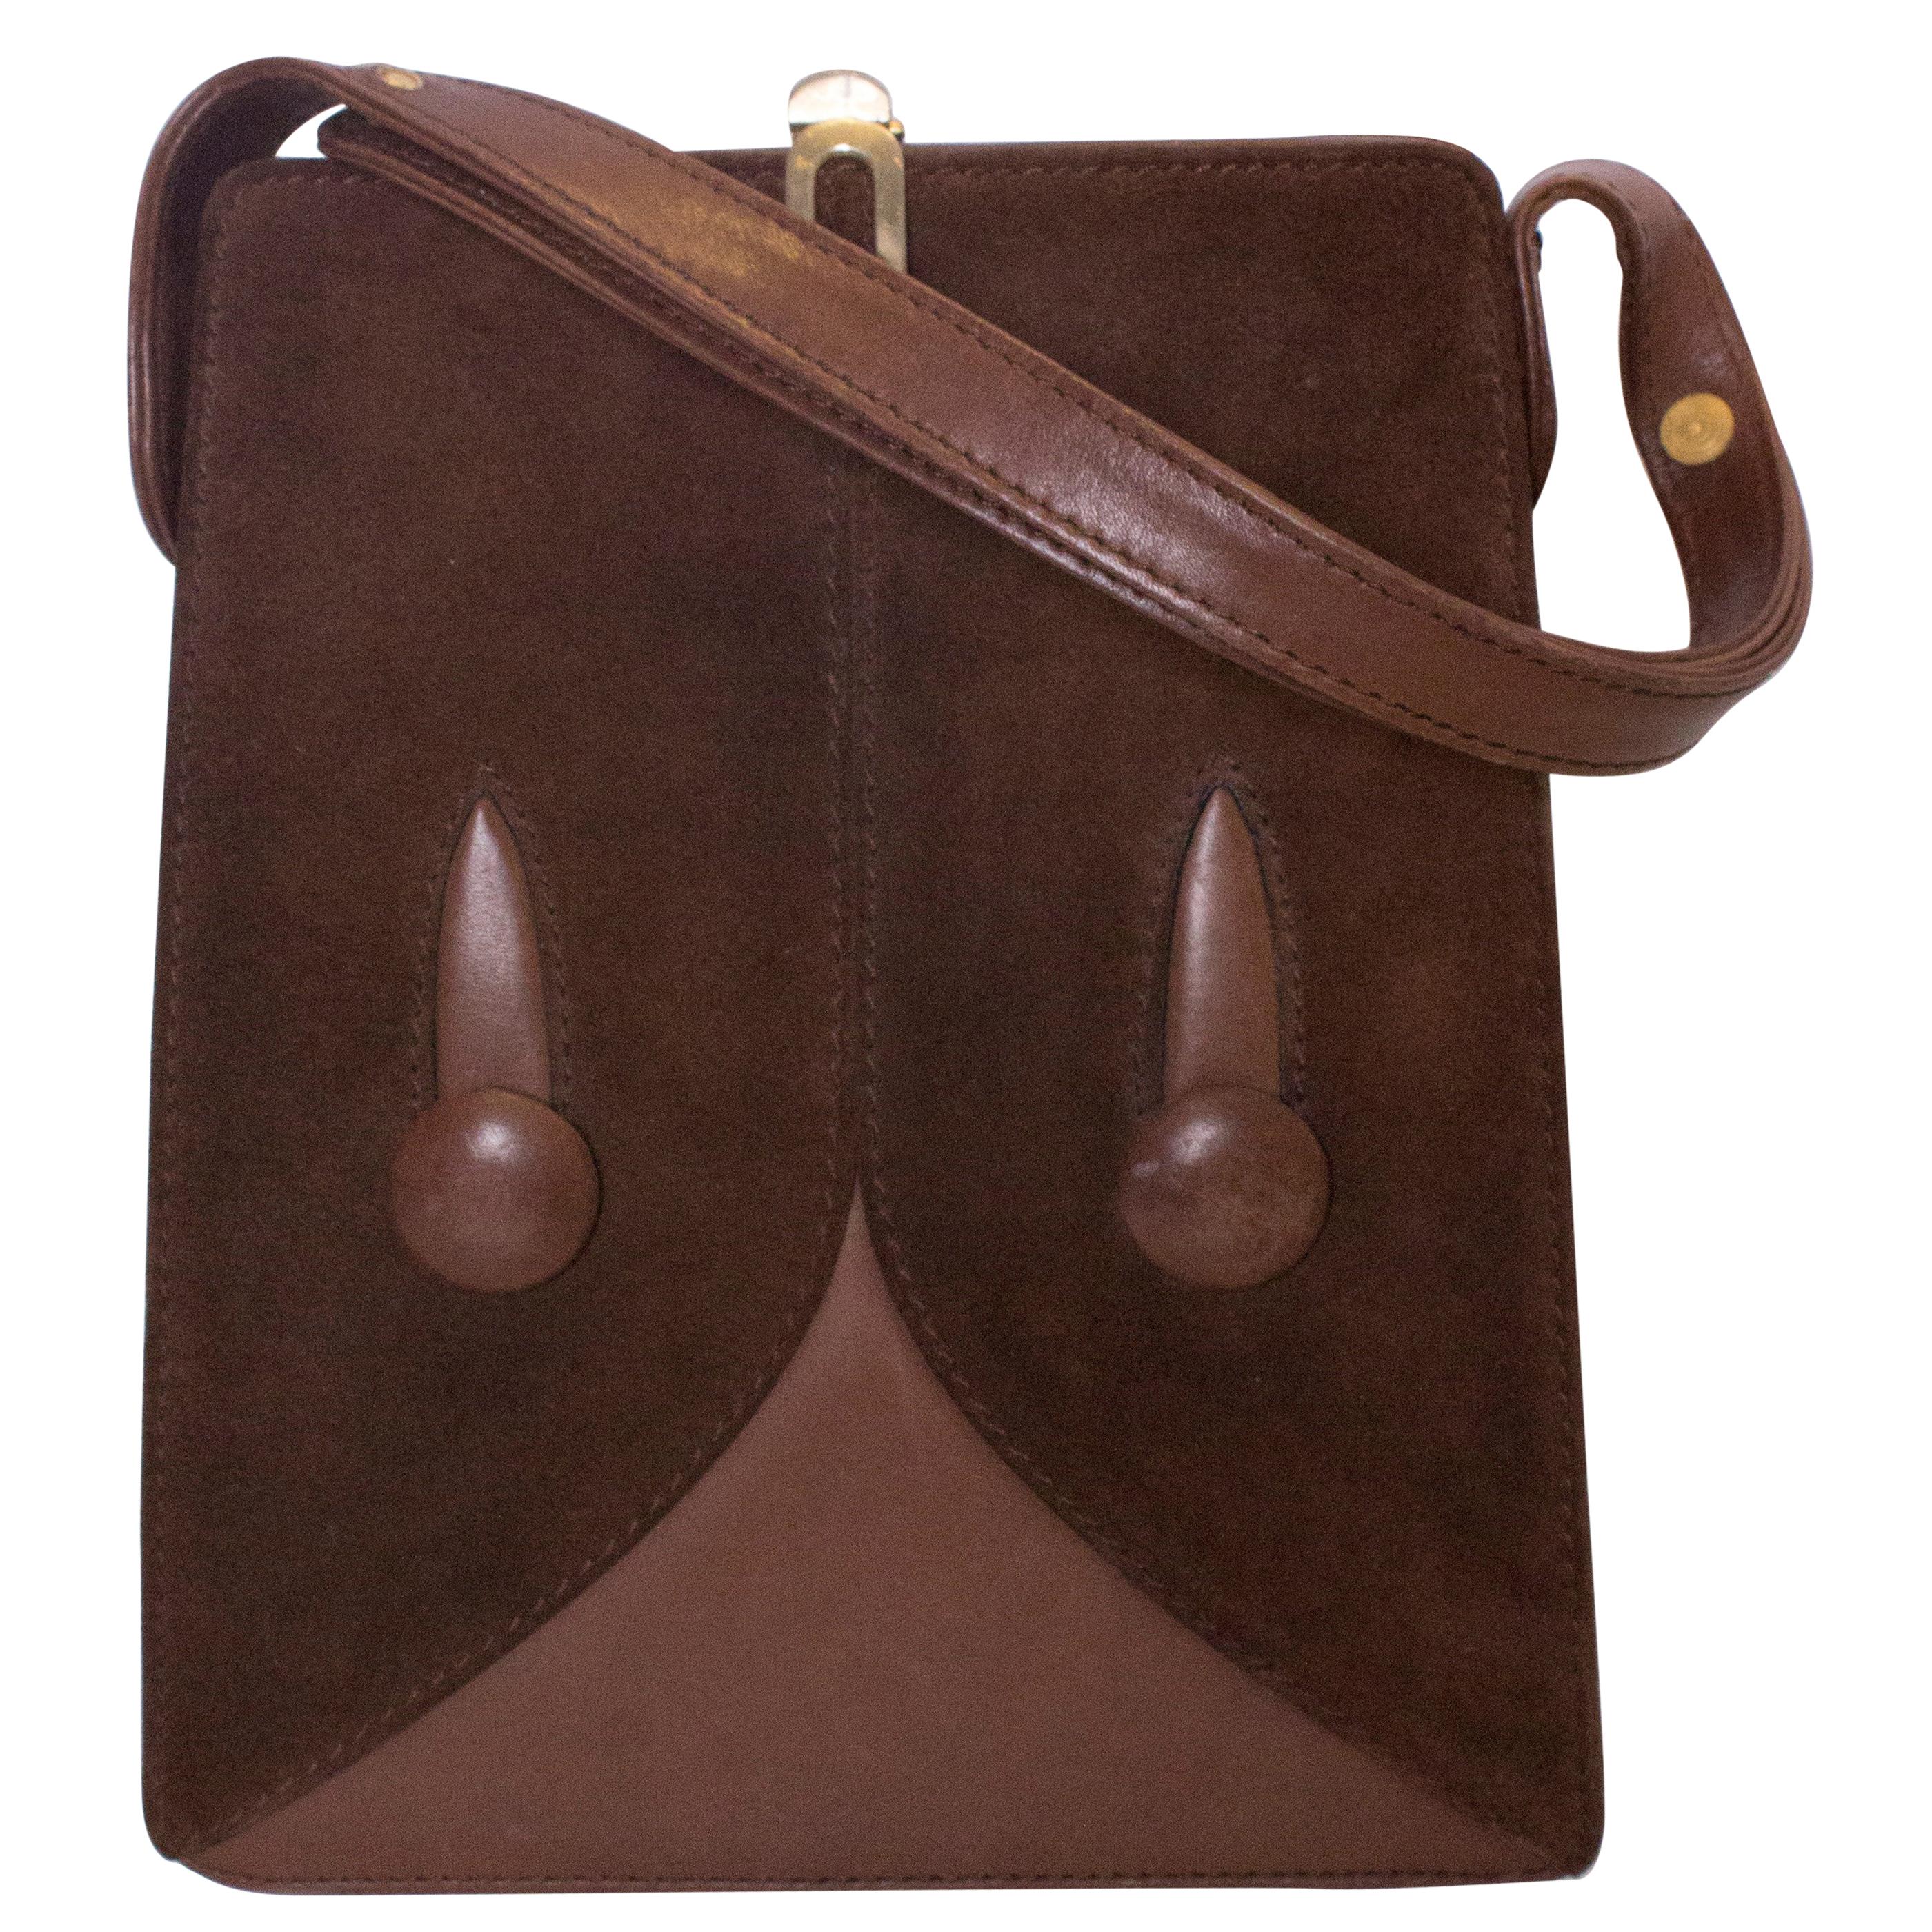 Vintage Brown Suede and Leather Bag